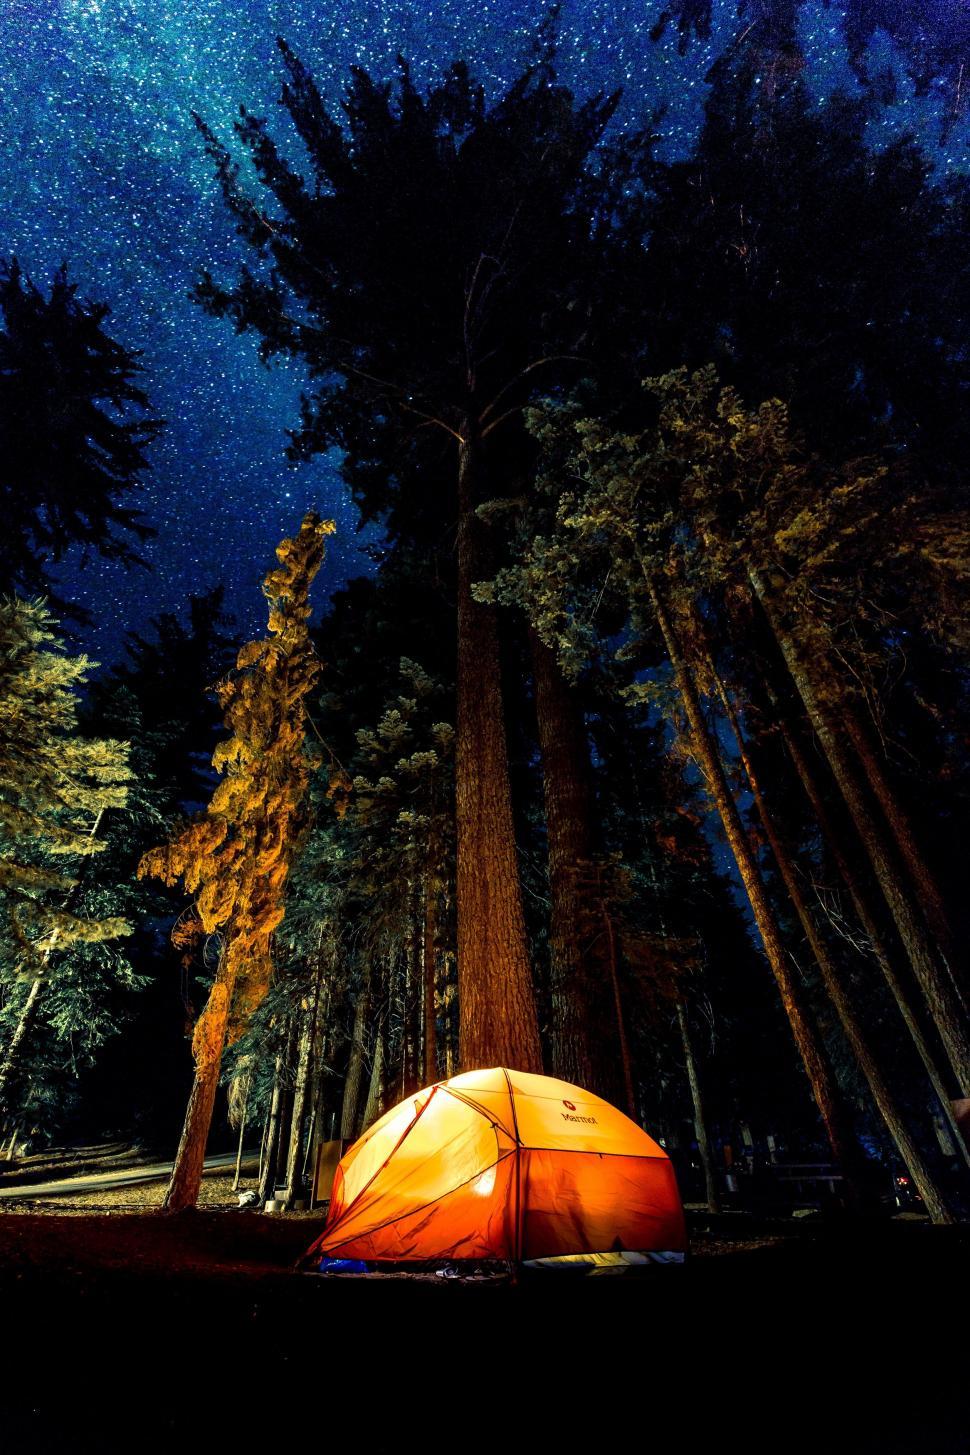 Free Image of Tent in Forest Under Starry Night Sky 